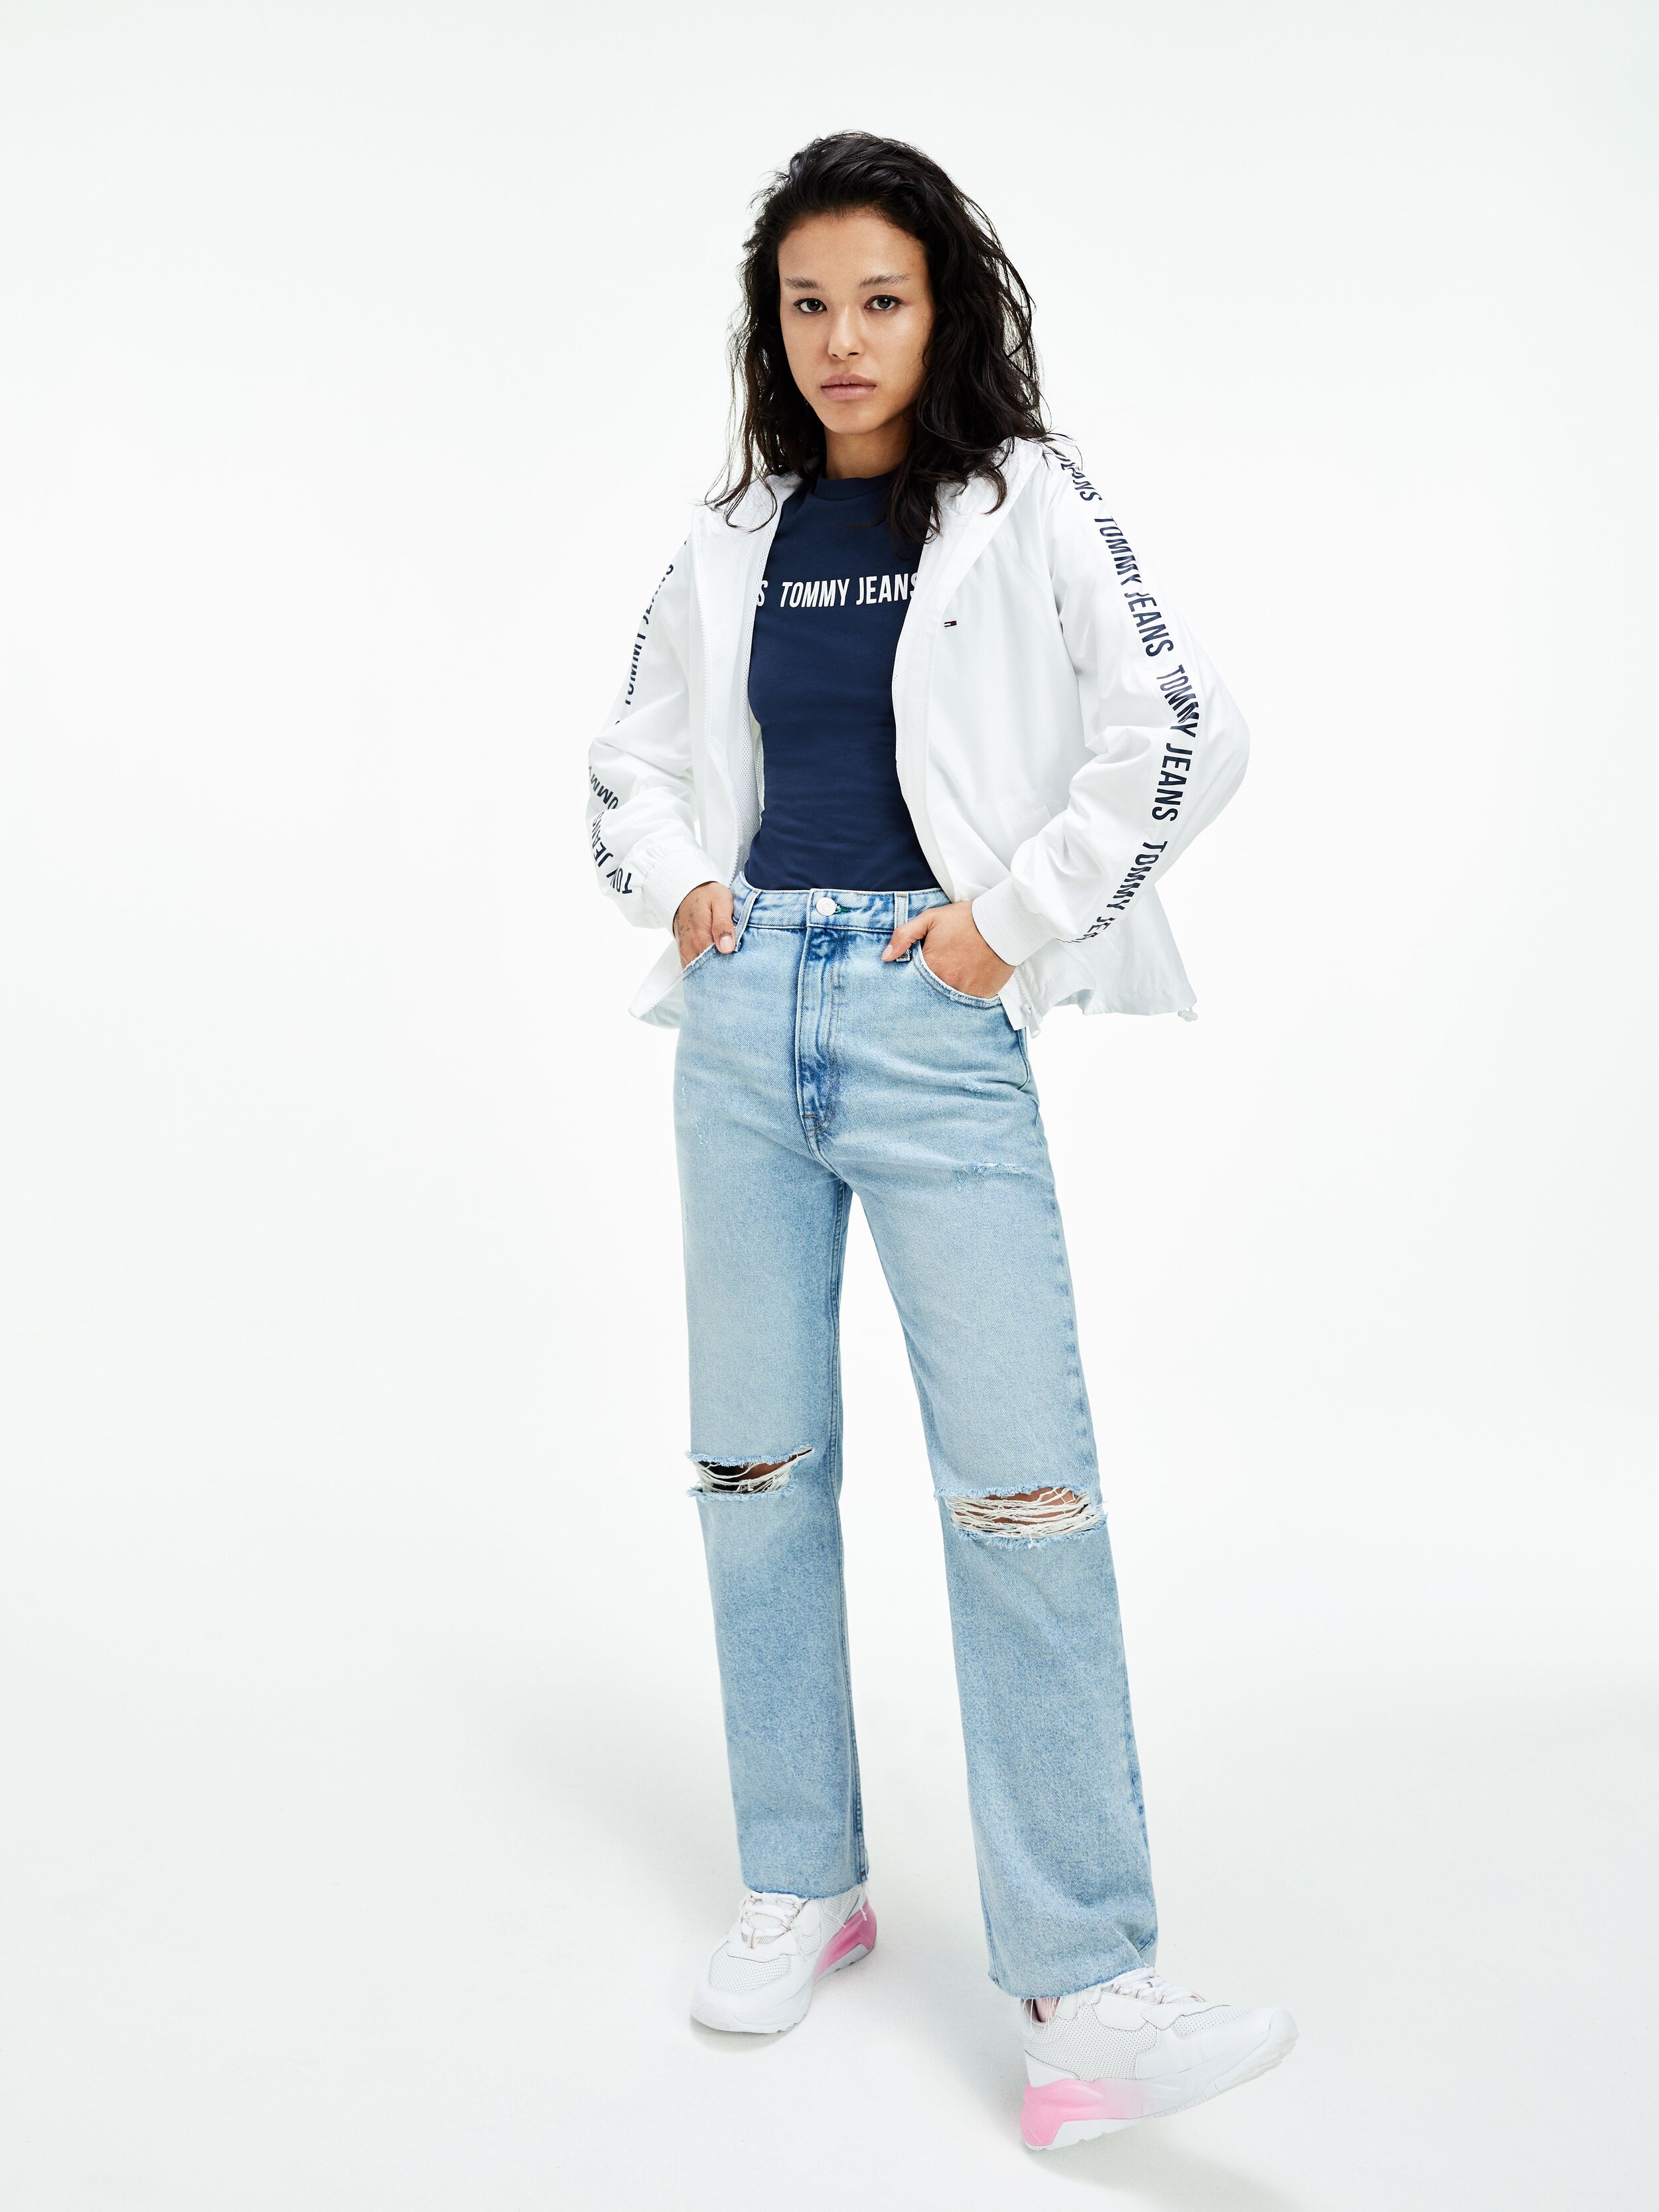 Spring 2021_Tommy Jeans_Look 2.jpeg